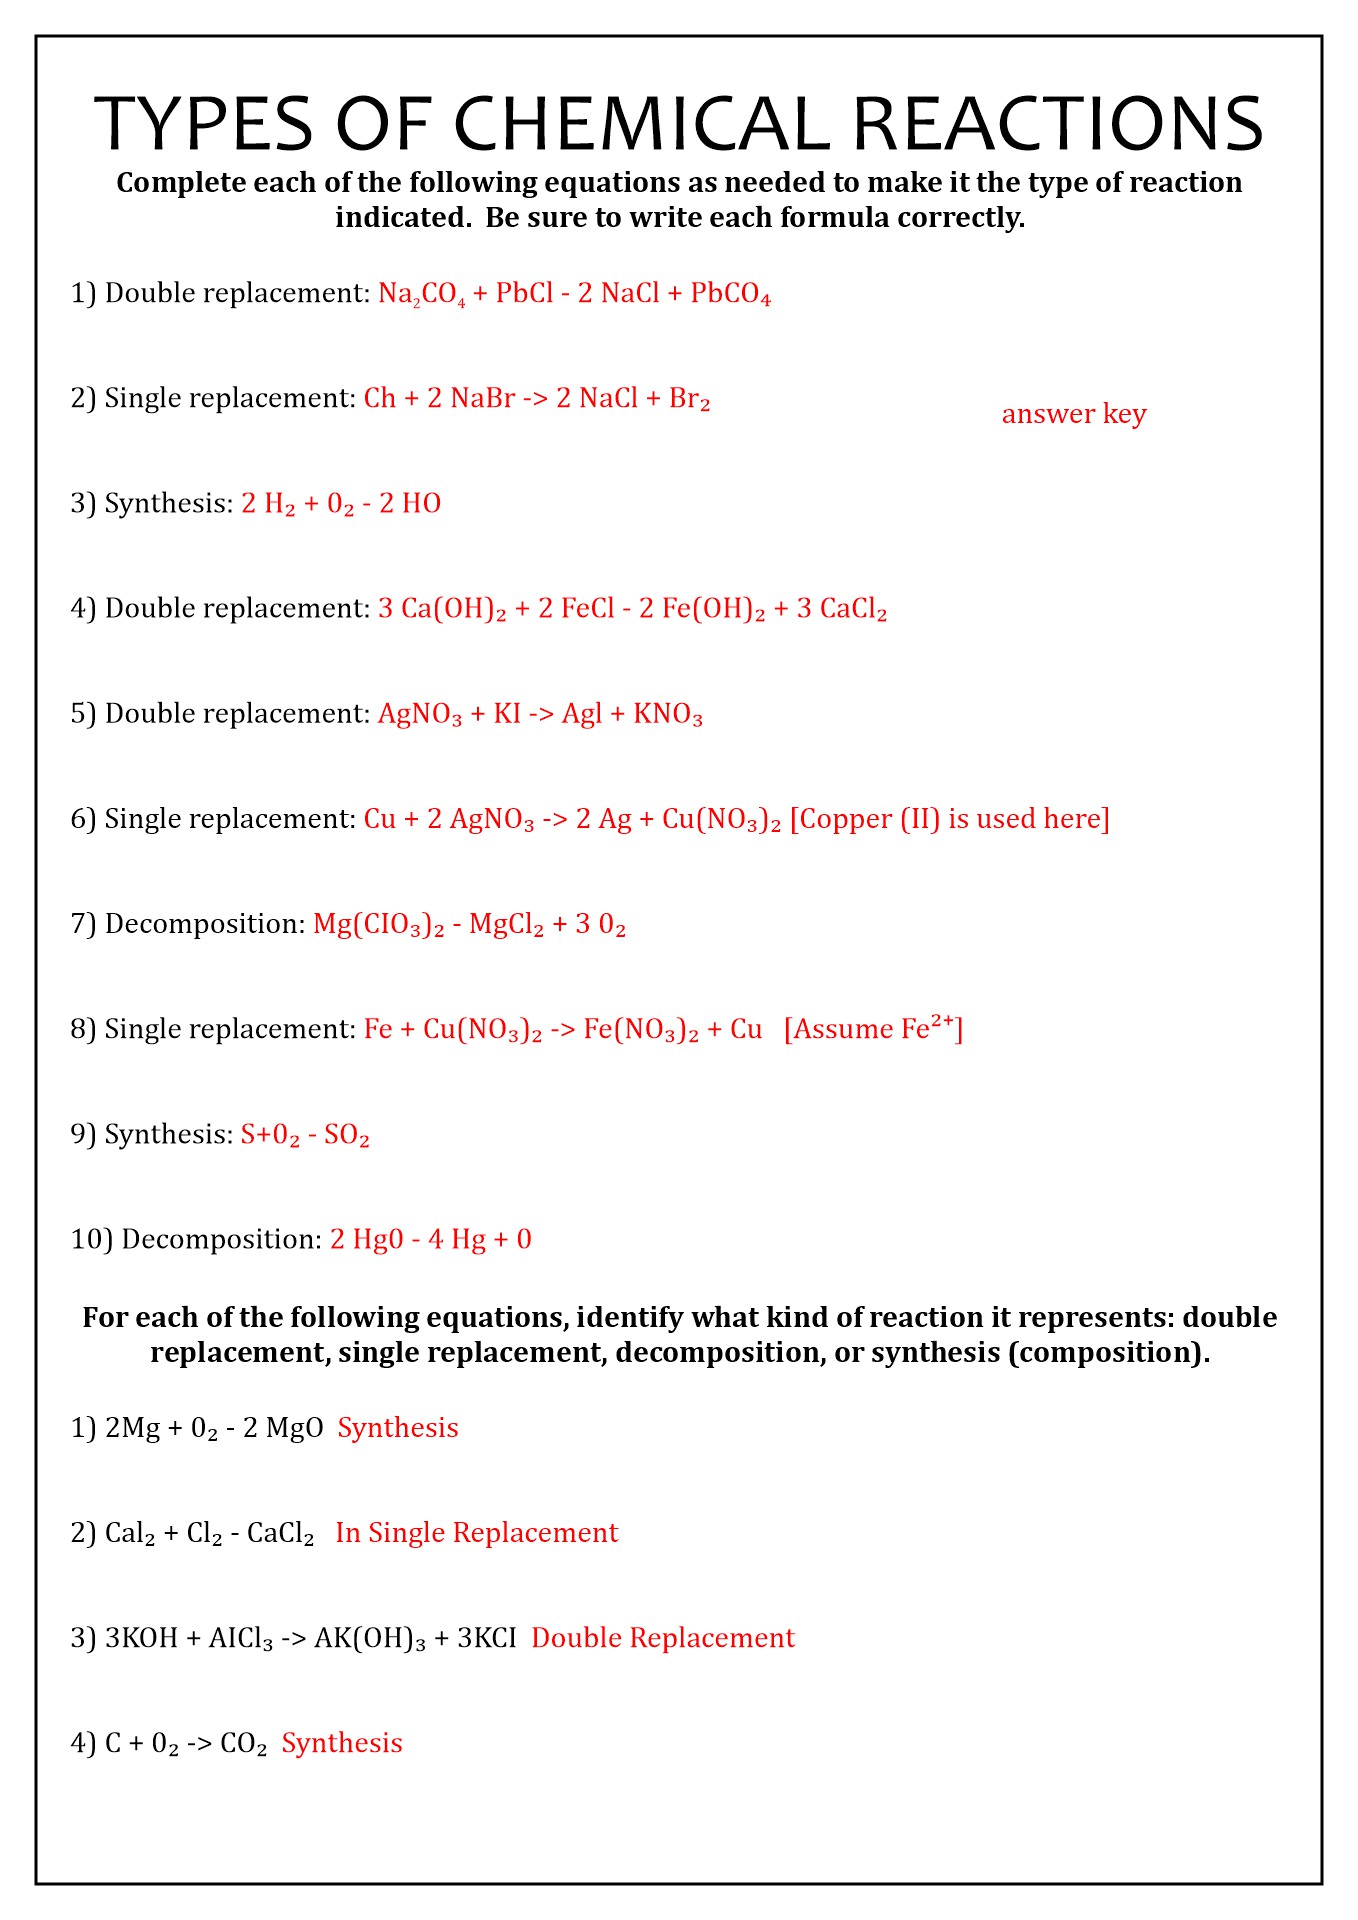 identifying-chemical-reactions-worksheet-answers